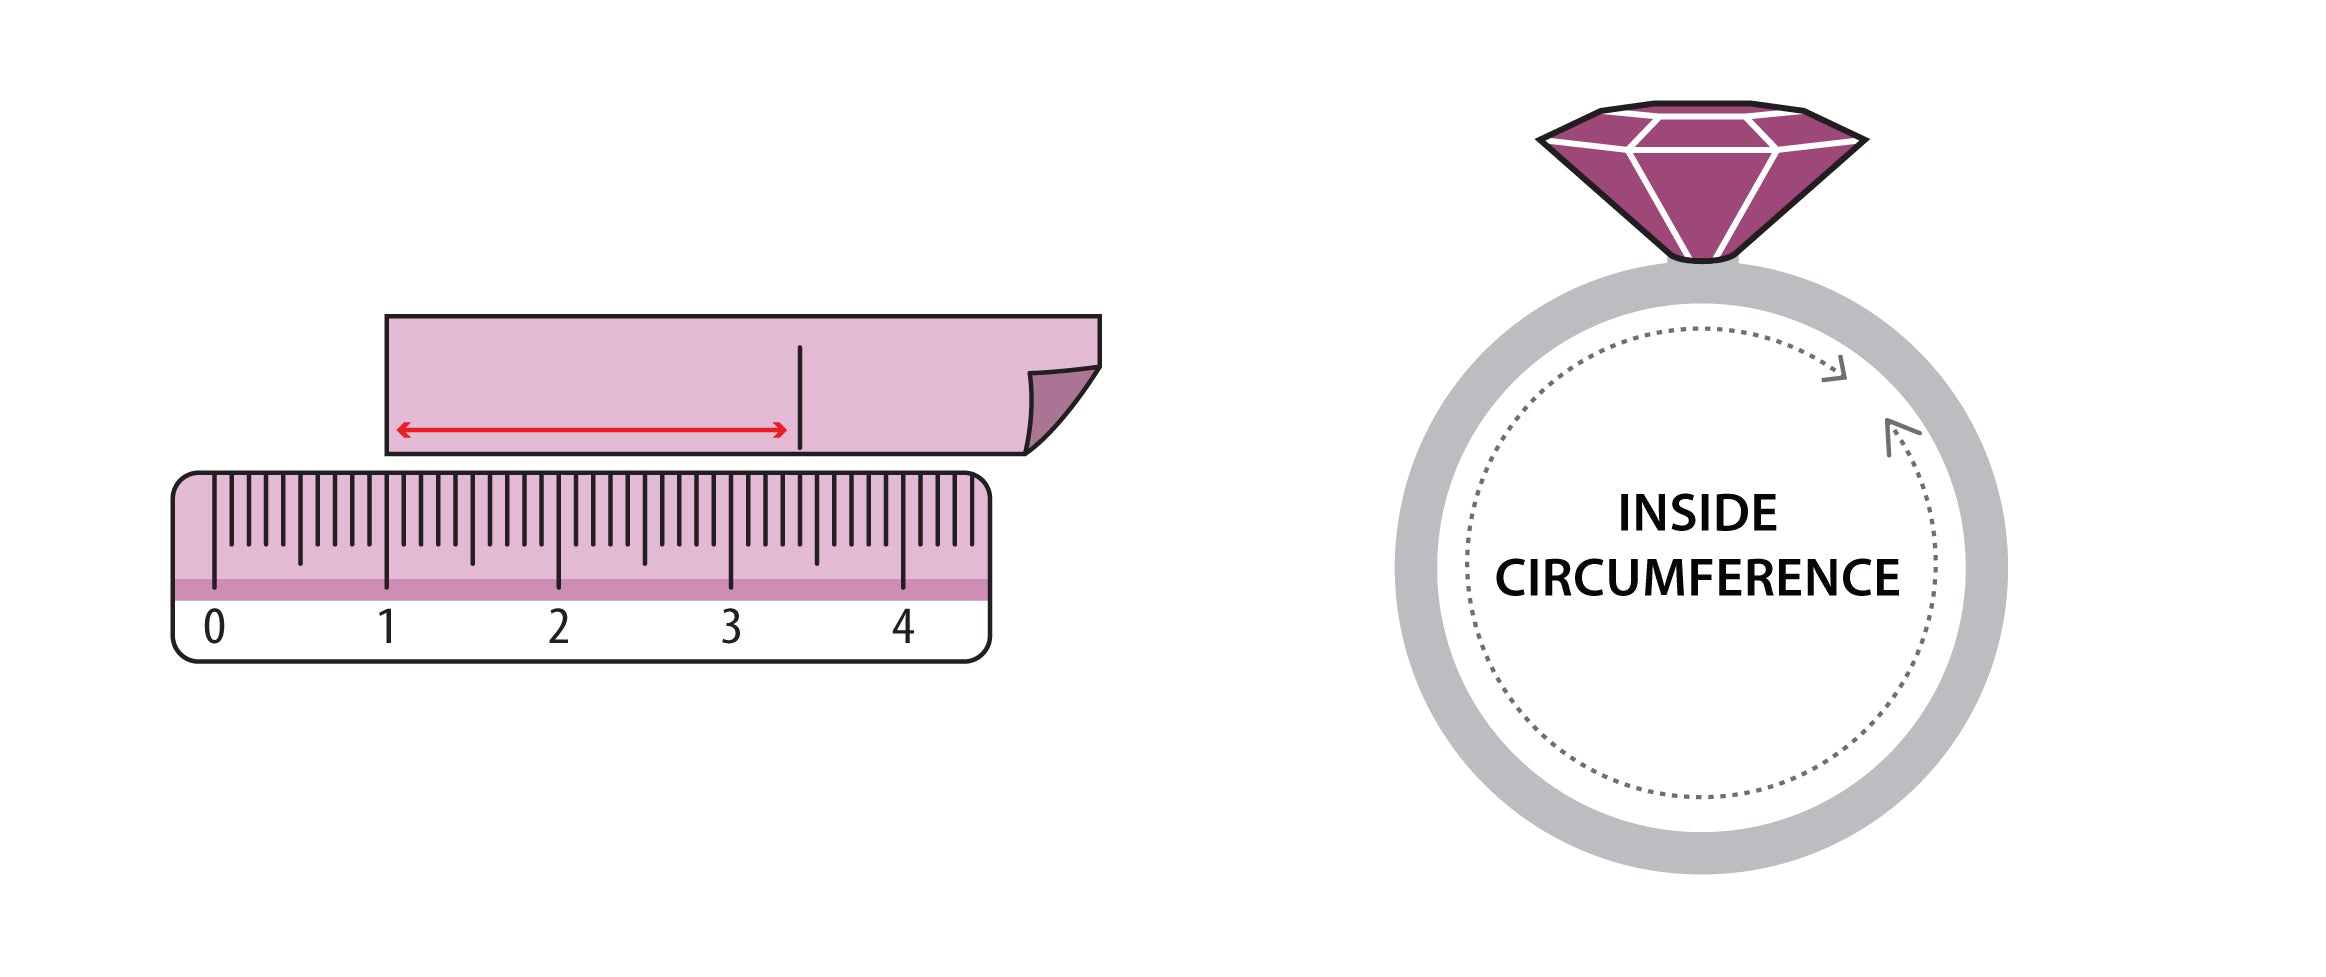 Are You Unsure of Your Ring Size? Consider Our Ring Size Chart